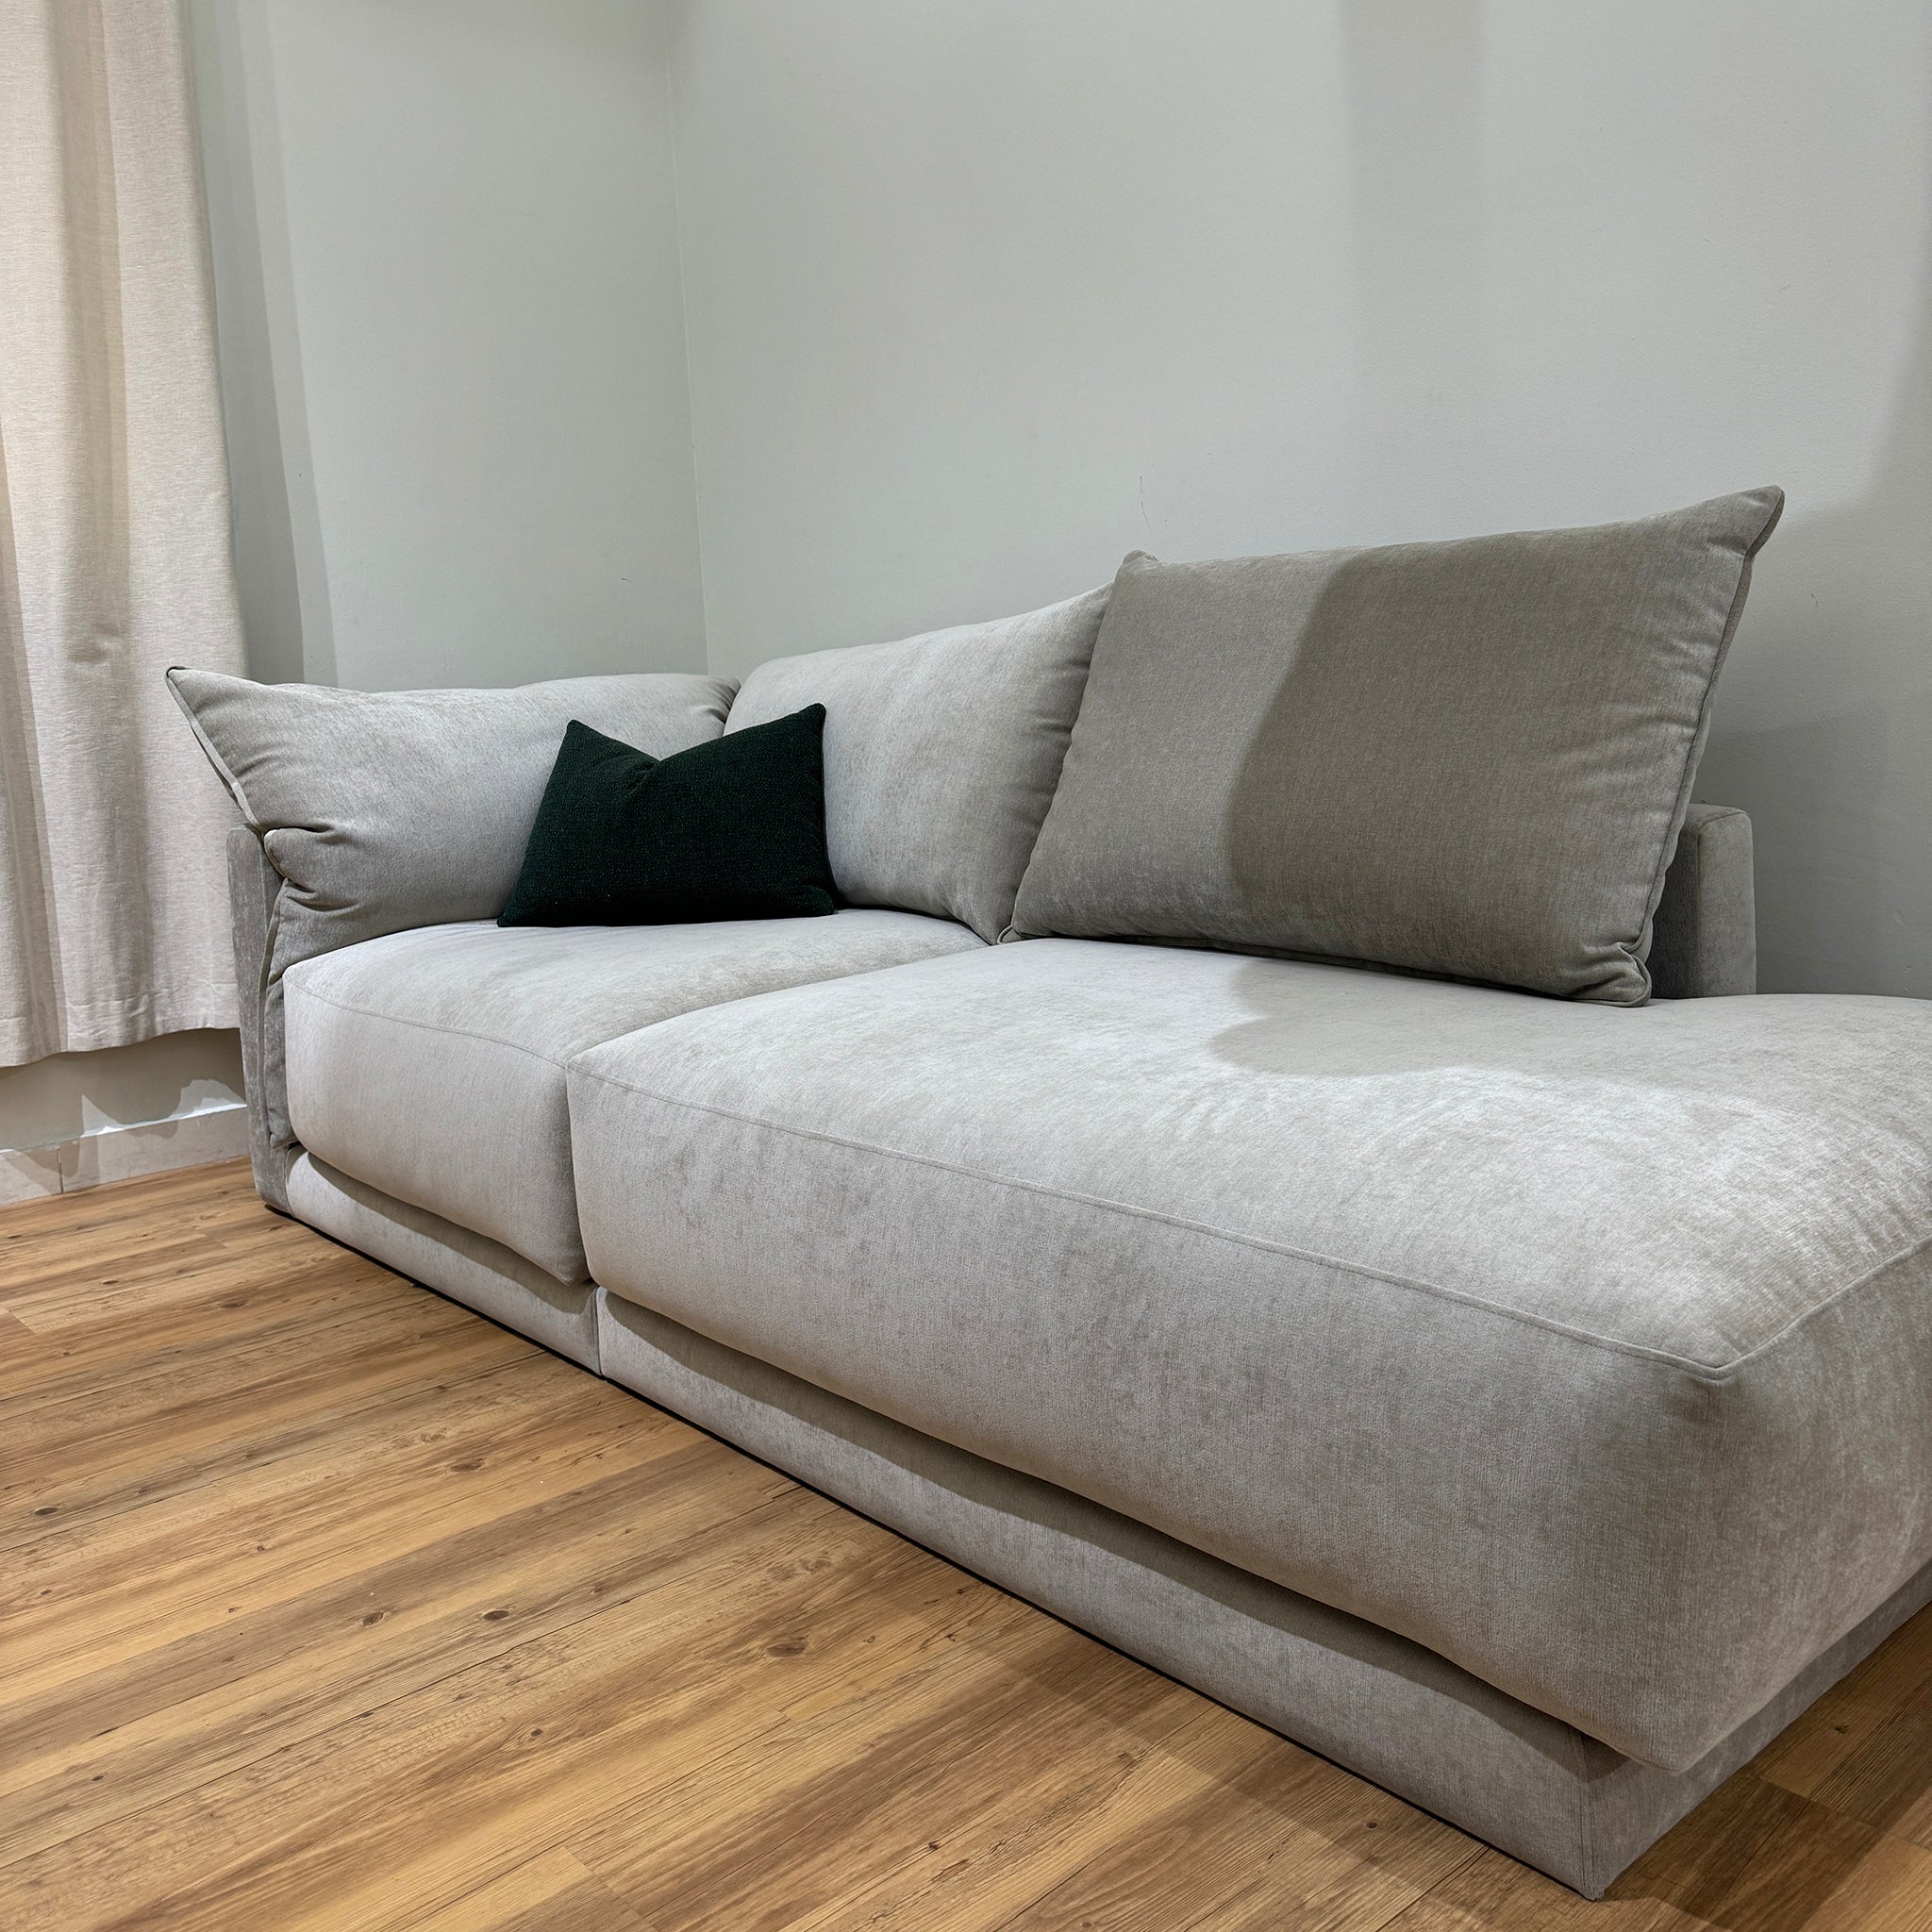 Gray plush Constance sofa in living room with hardwood floors for a comfortable, modern look